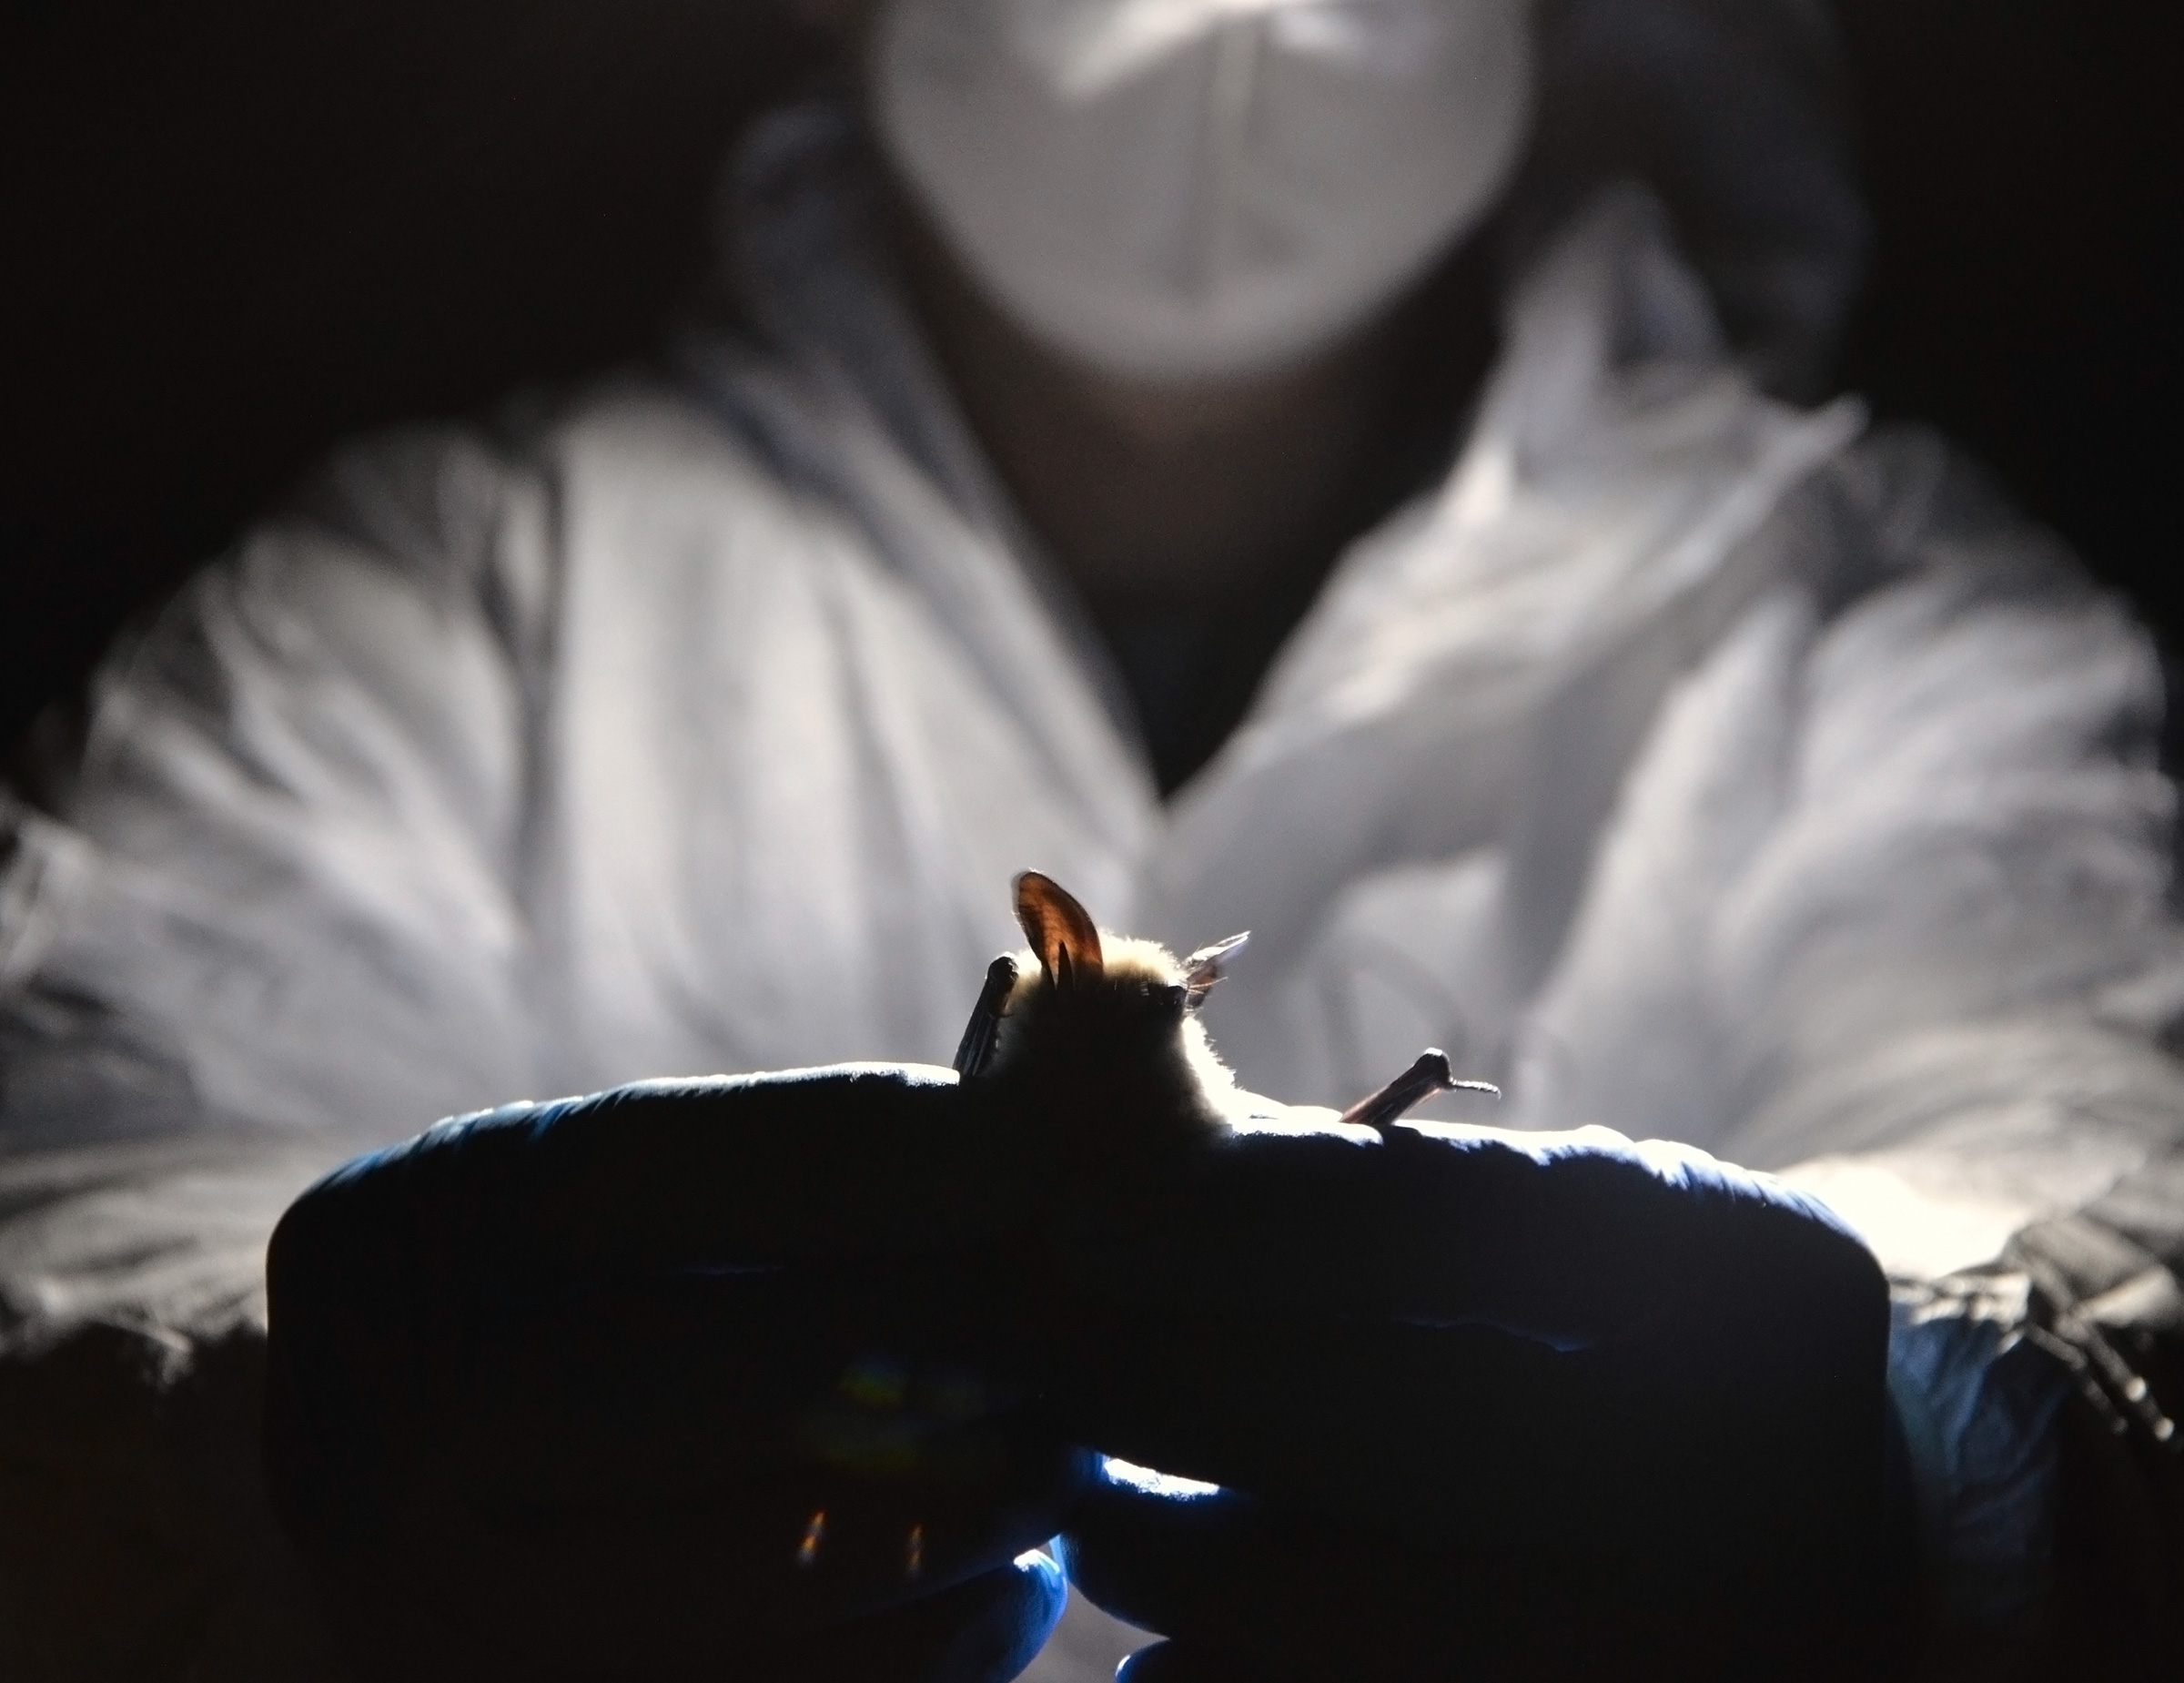 A person in a white protective suit and N-95 mask is holding a bat gently with his blue gloved hands to release the bat back into its habitat.